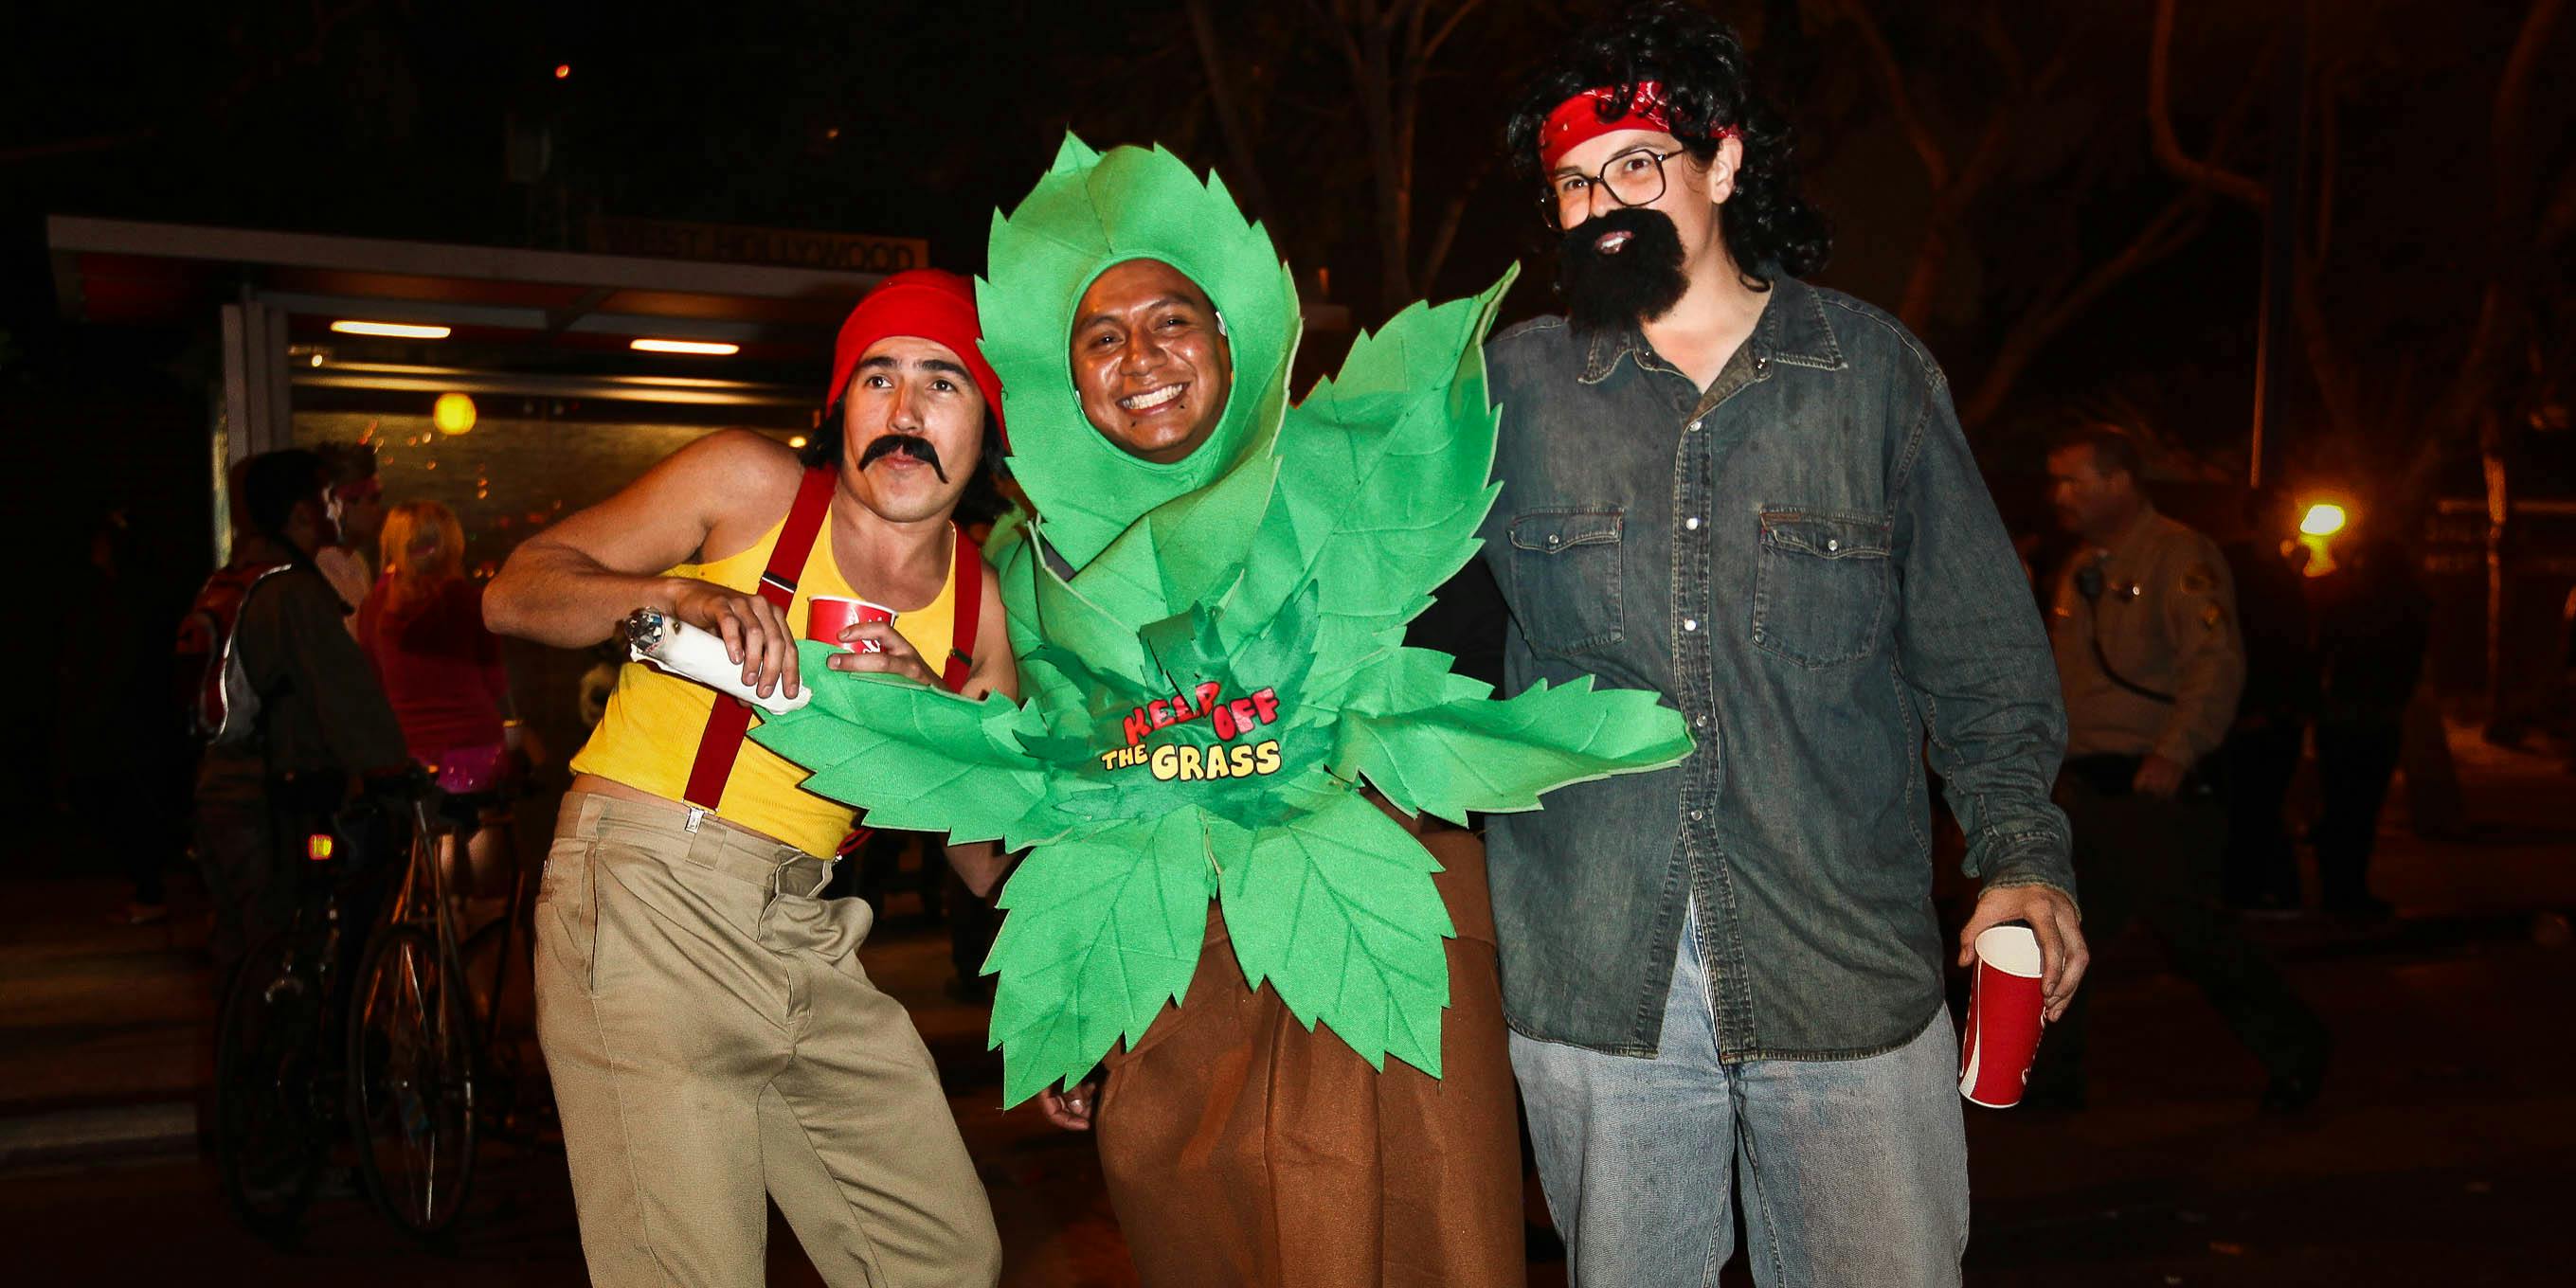 20 Easy and Hilarious Weed Halloween Costume Ideas photo